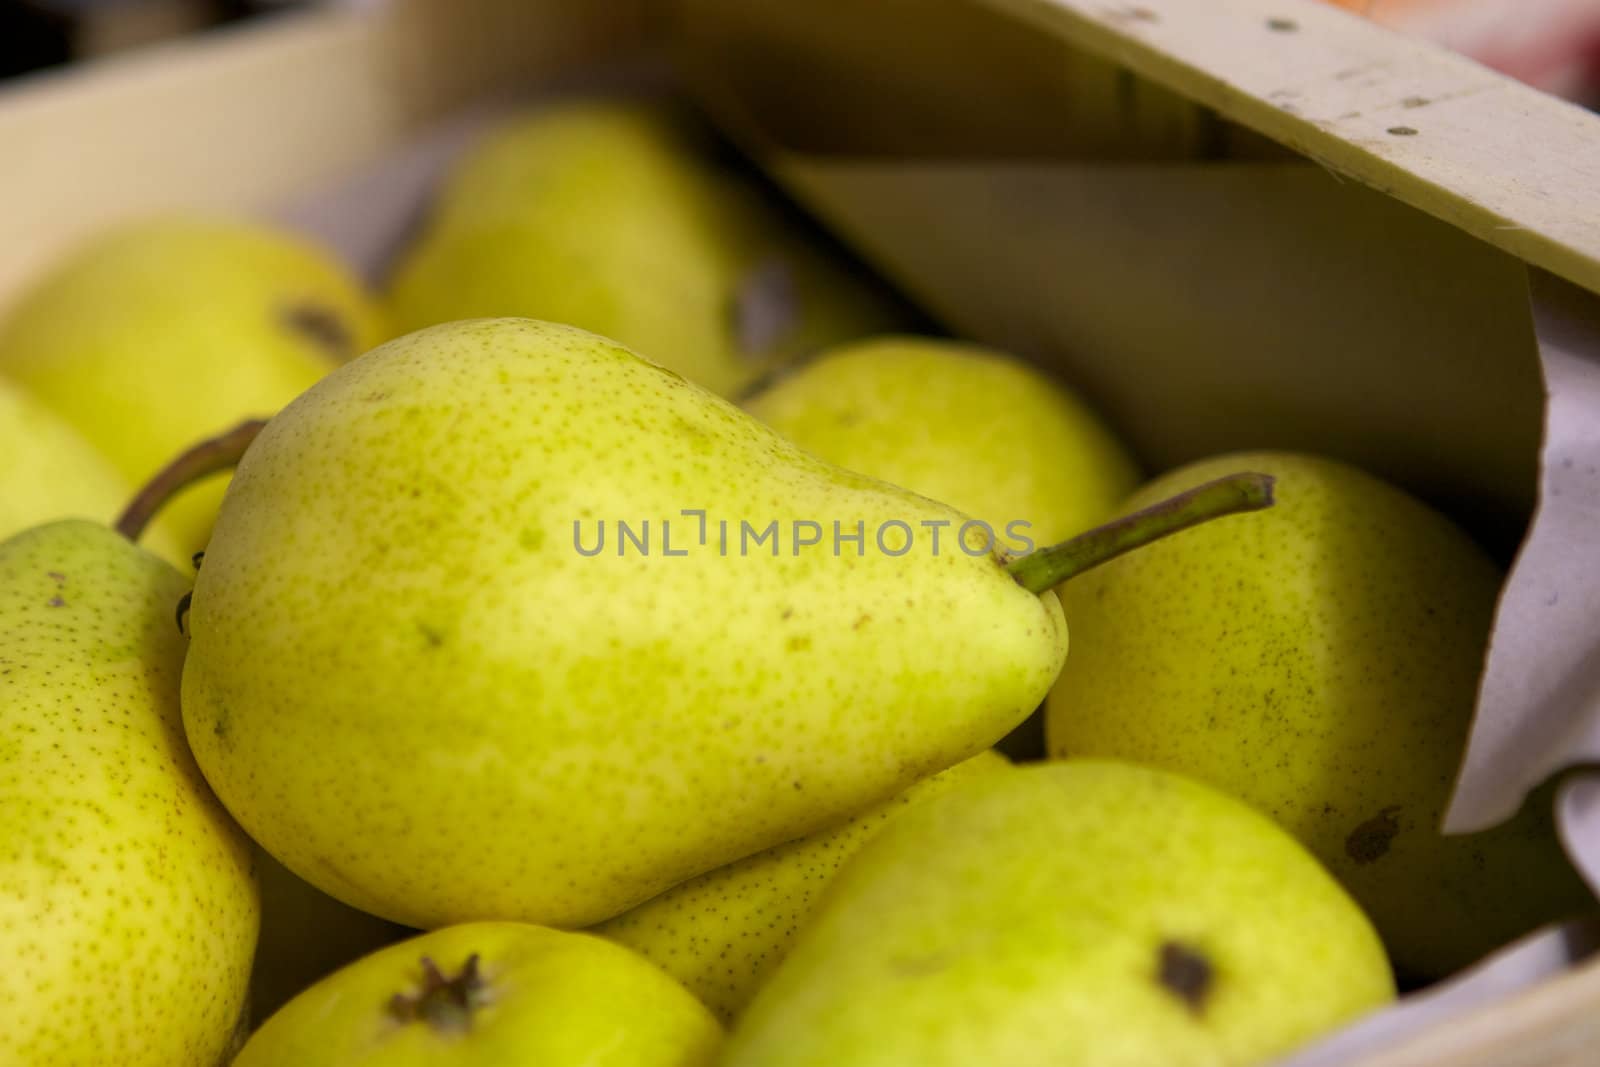 Pear in the box